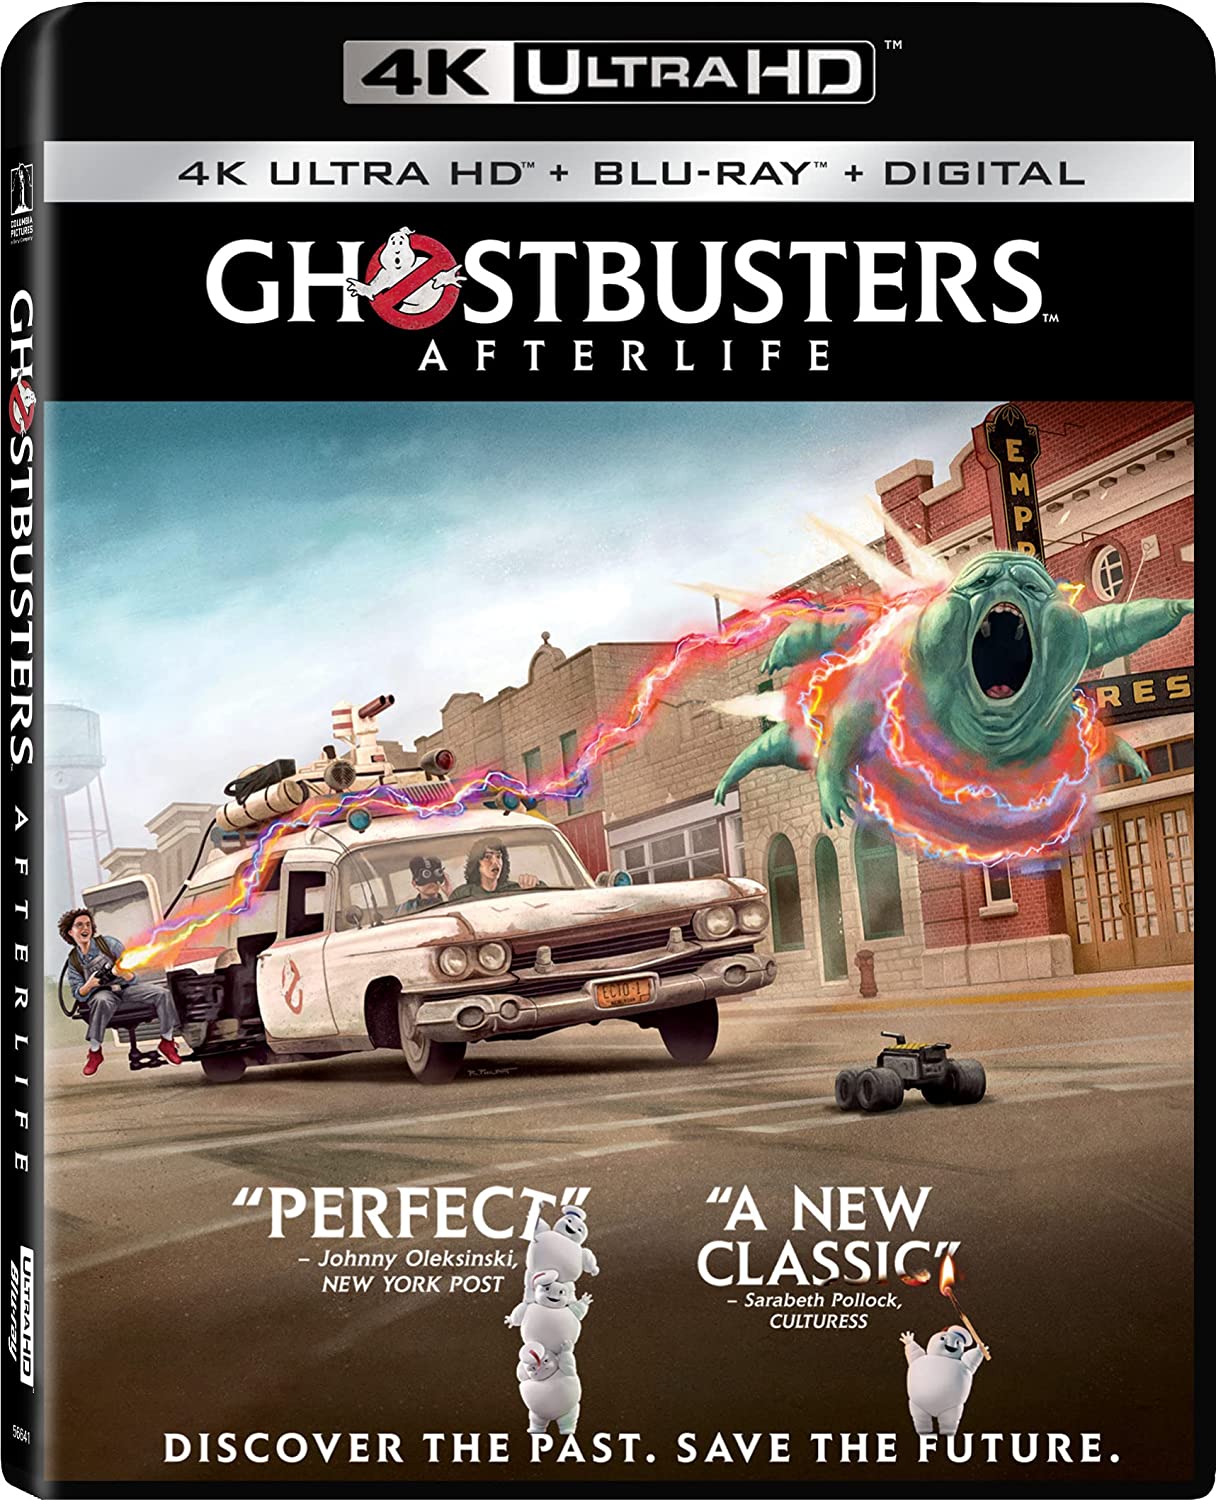 Ghostbusters- Afterlife 4k Blu-ray